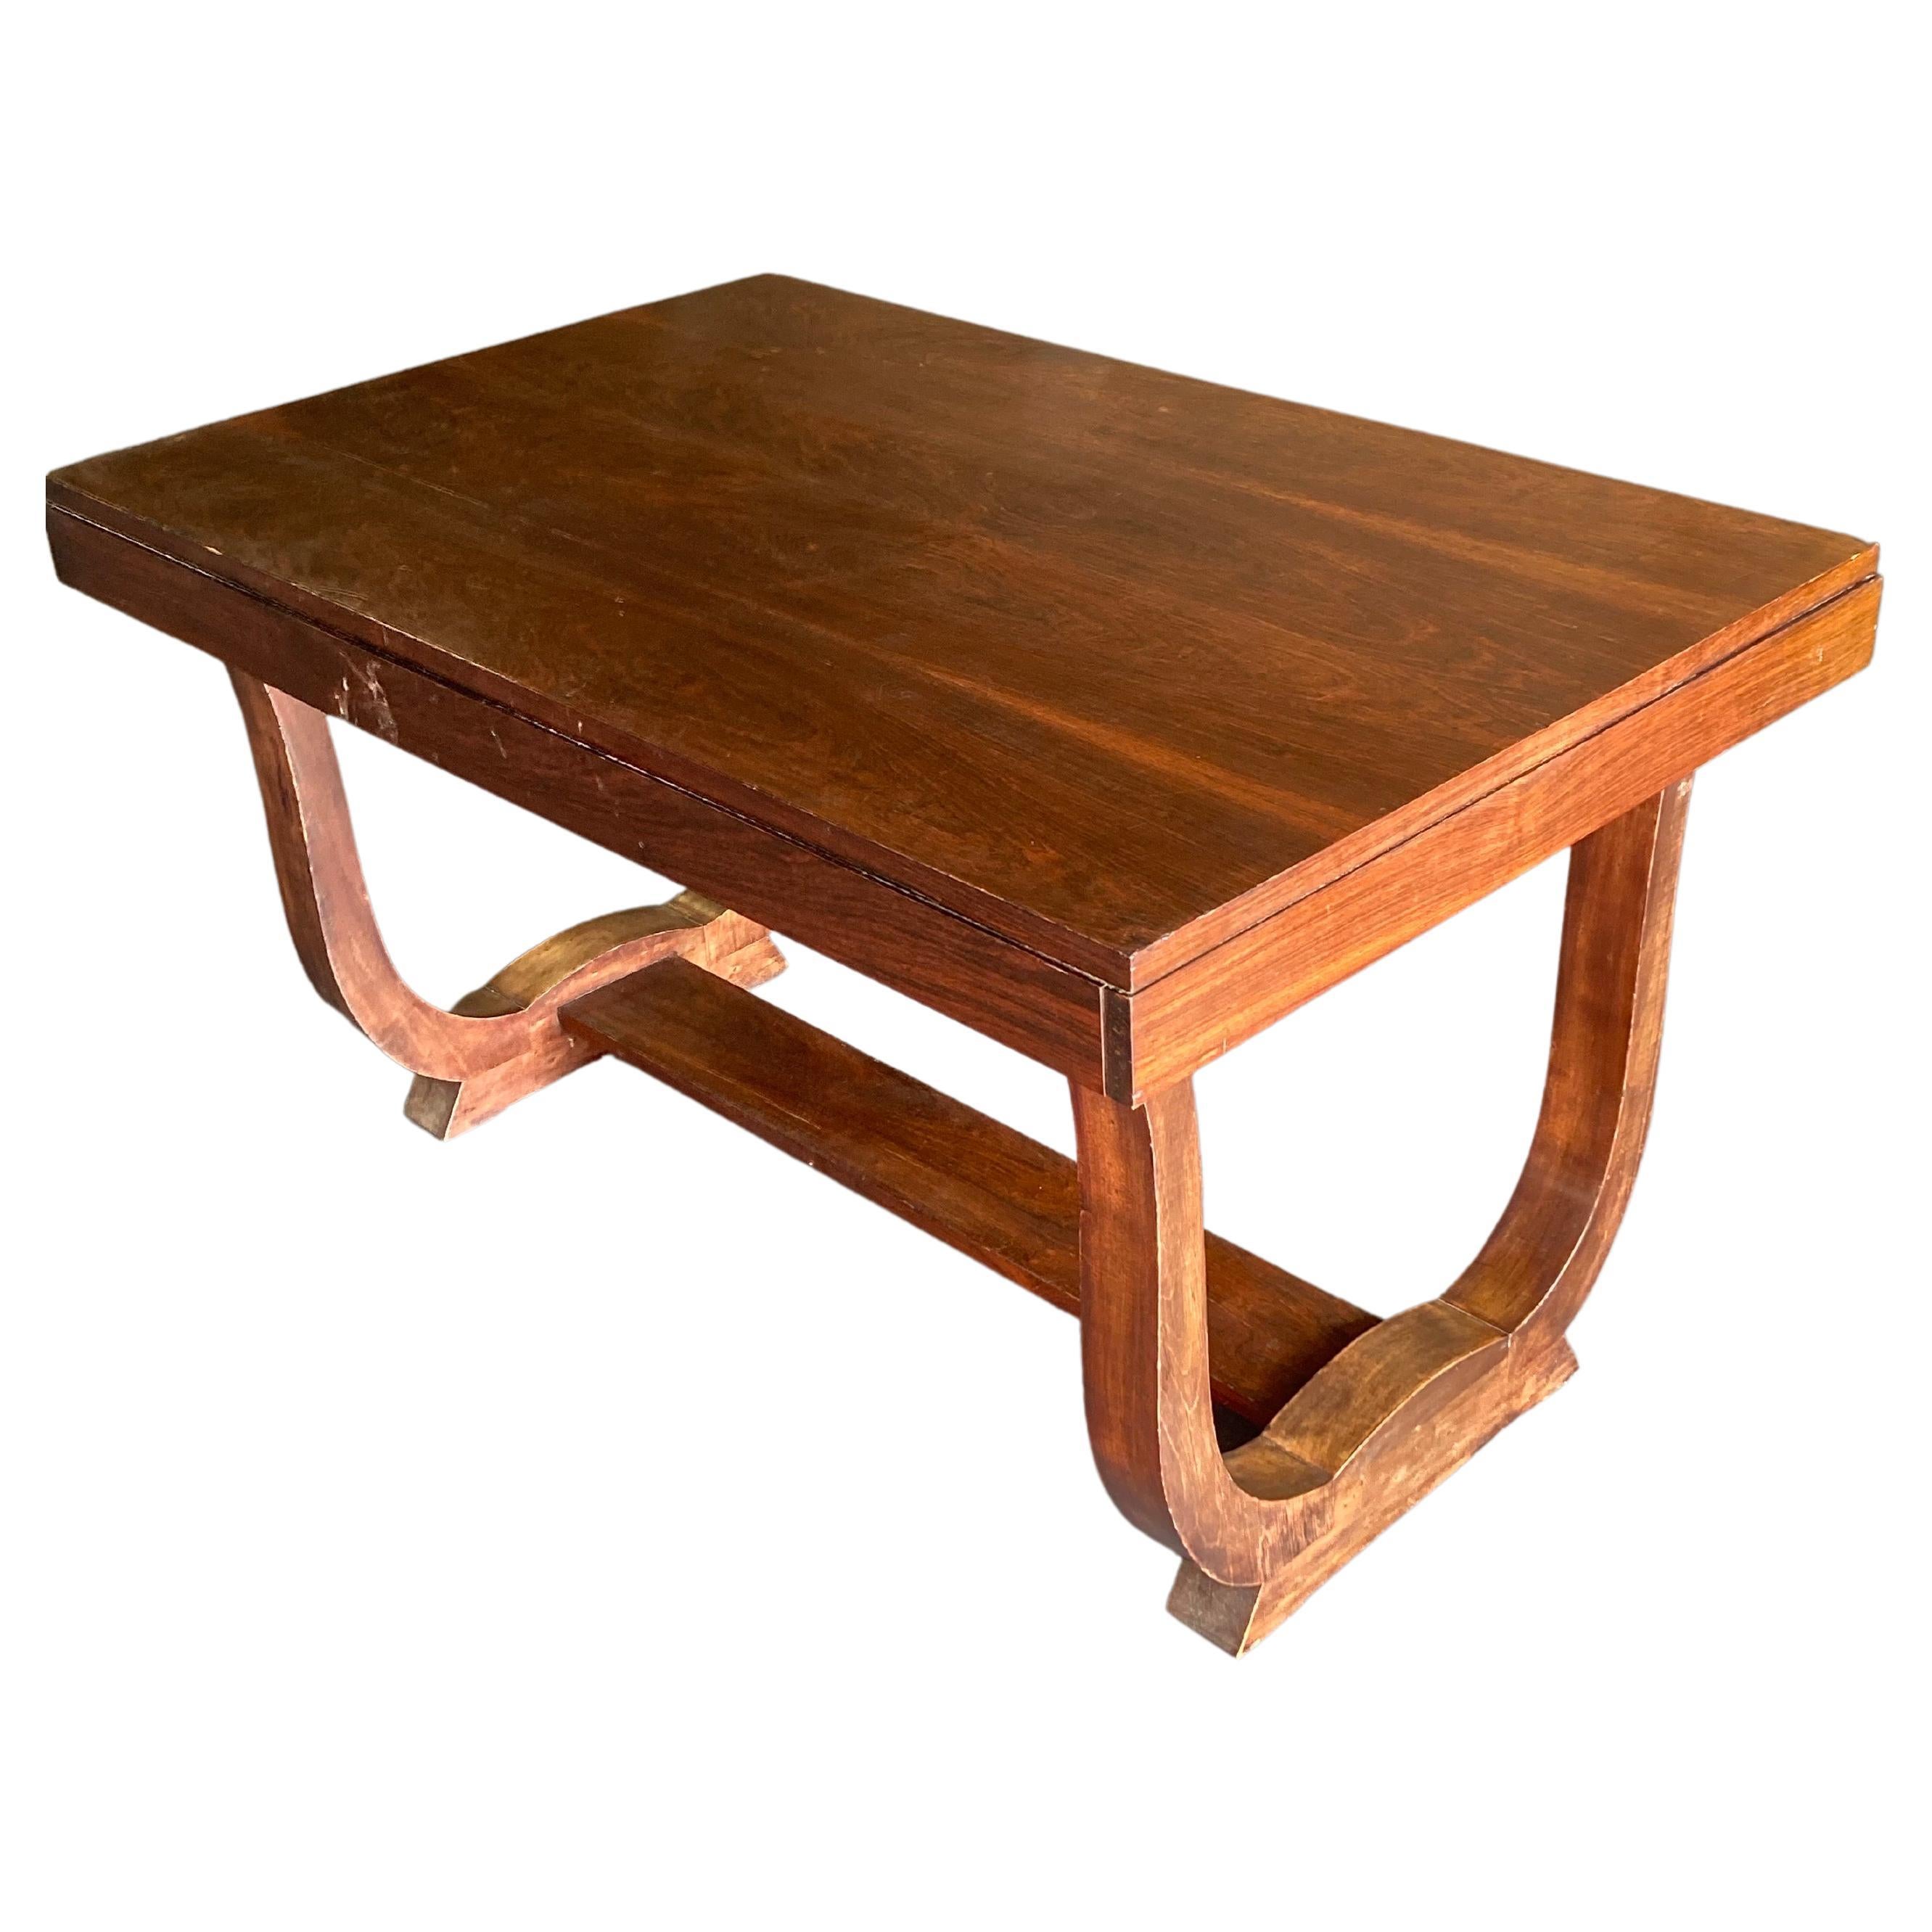 This table was manufactured by Maison Dominique, France circa 1930 and is a versatile table that can be used as an occasional dining table or hall table.

Andre Domin & Marcel Genevriere set up the Maison Dominique company and designed the